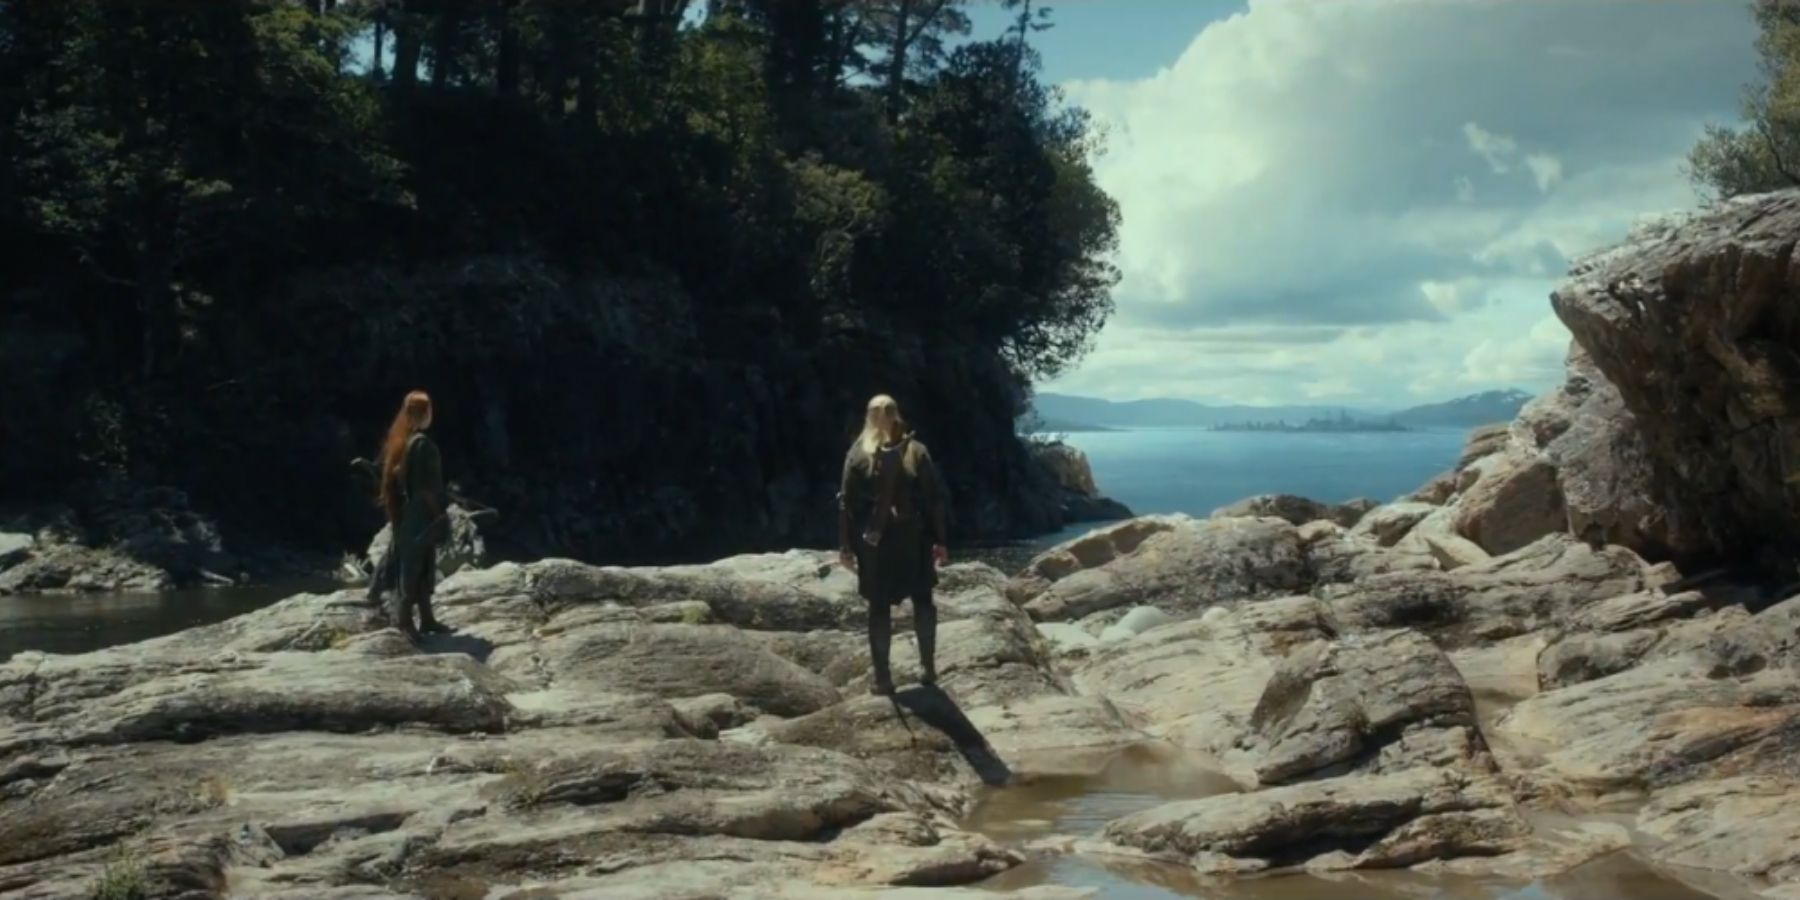 Legolas and Tauriel looking at the ocean